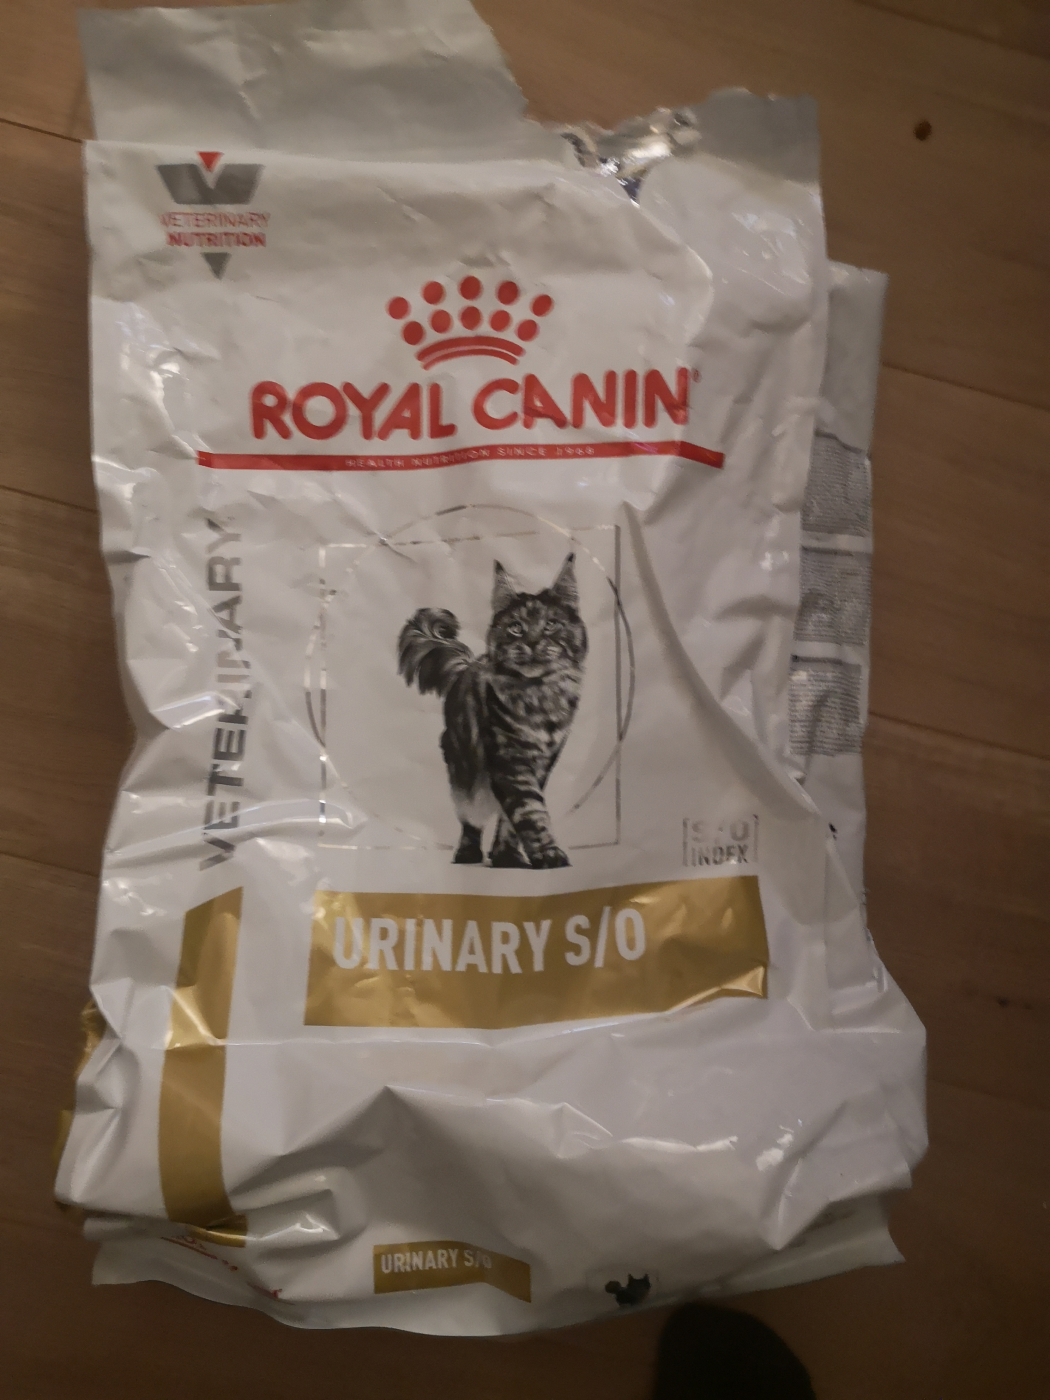 Royal Canin - Croquettes Veterinary Diet Urinary S/O pour Chat - 3,5Kg